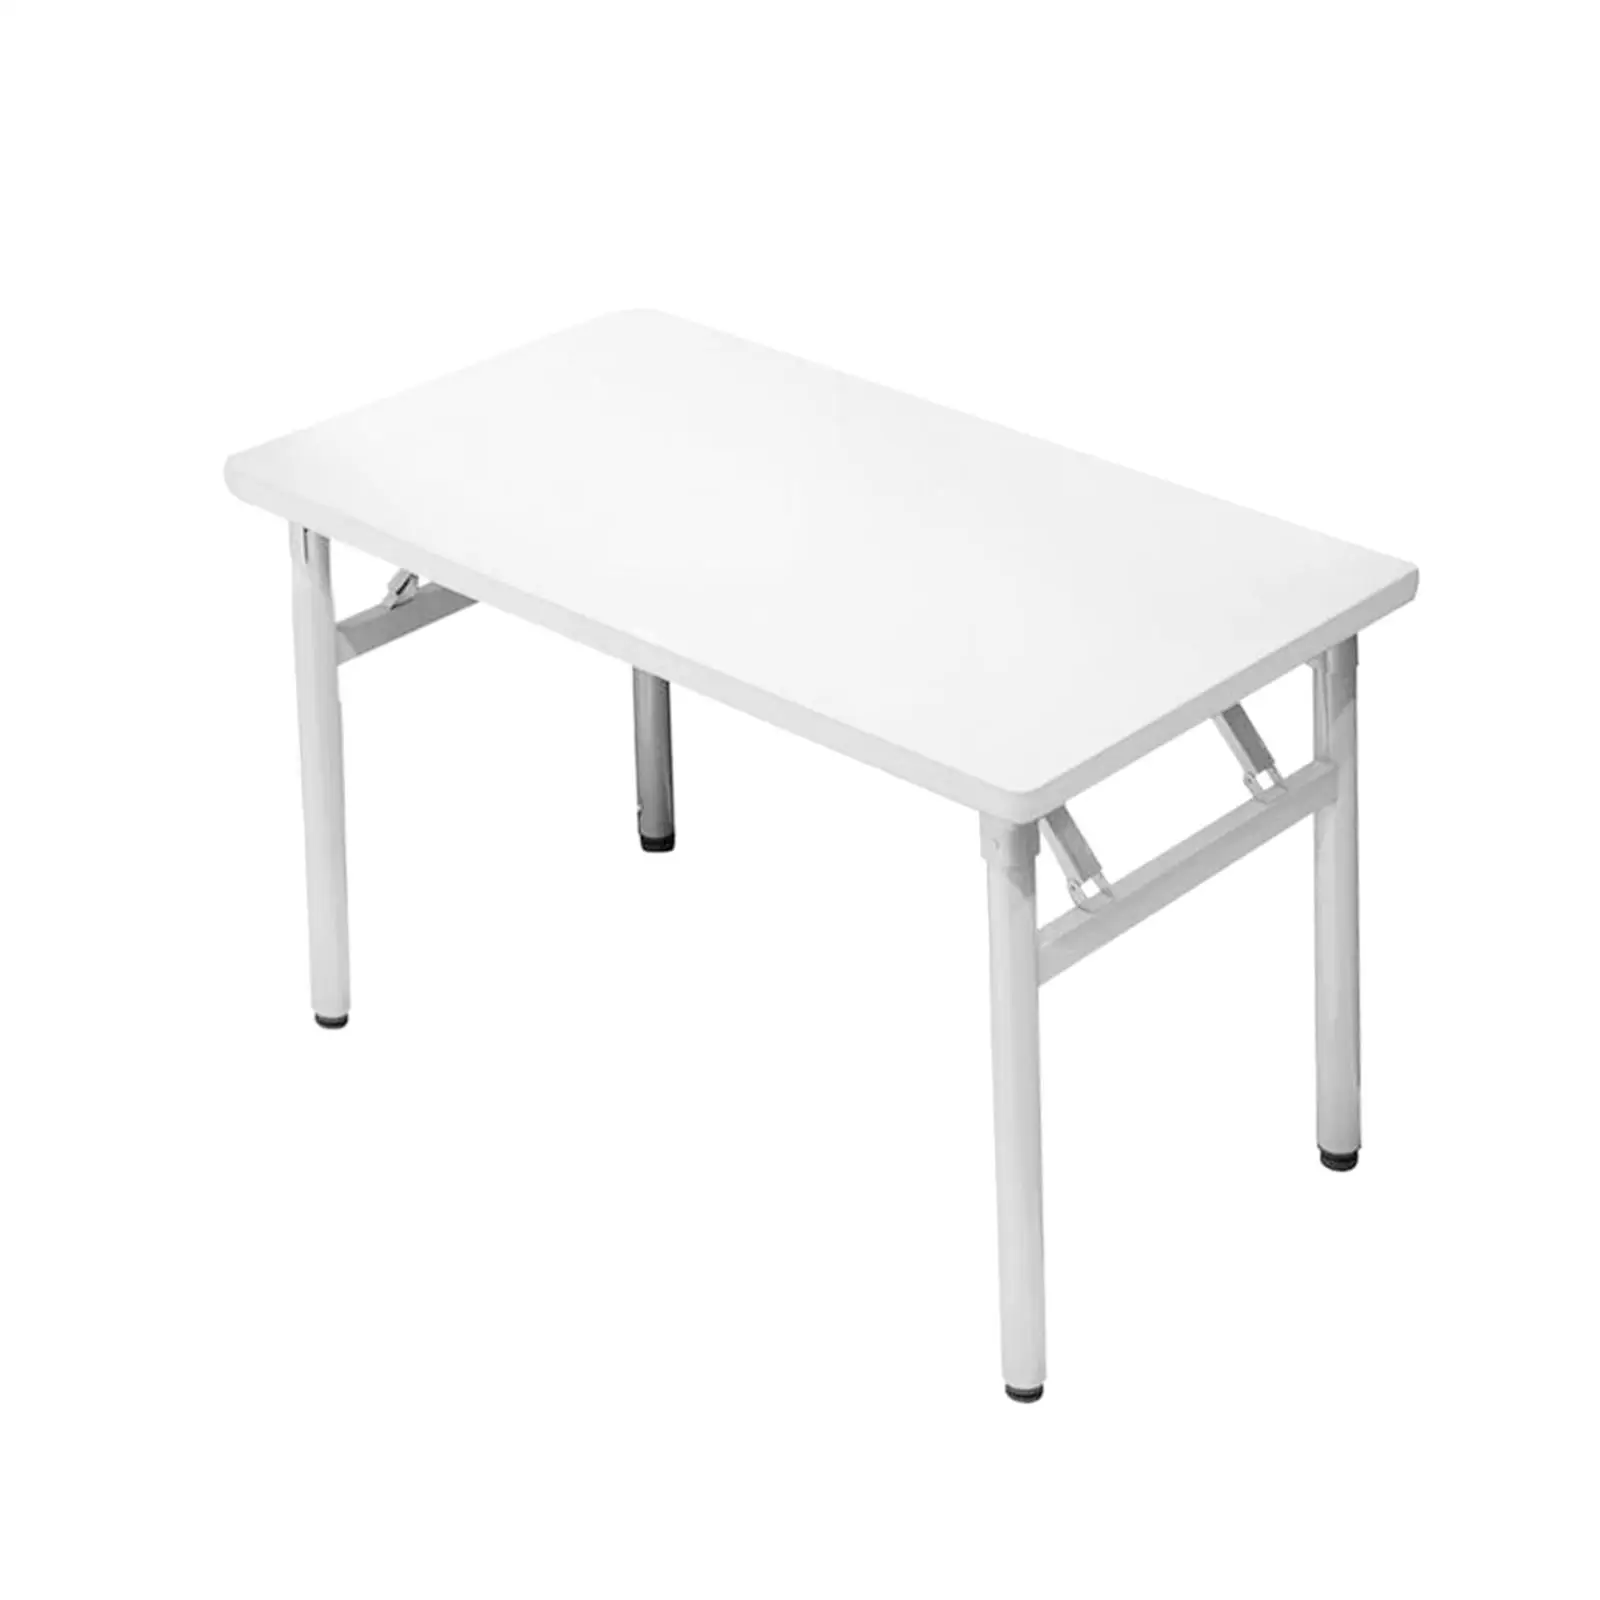 Heavy Duty Folding Table Study Table Laptop Tea Coffee Picnic Table Desk for Outdoor Party